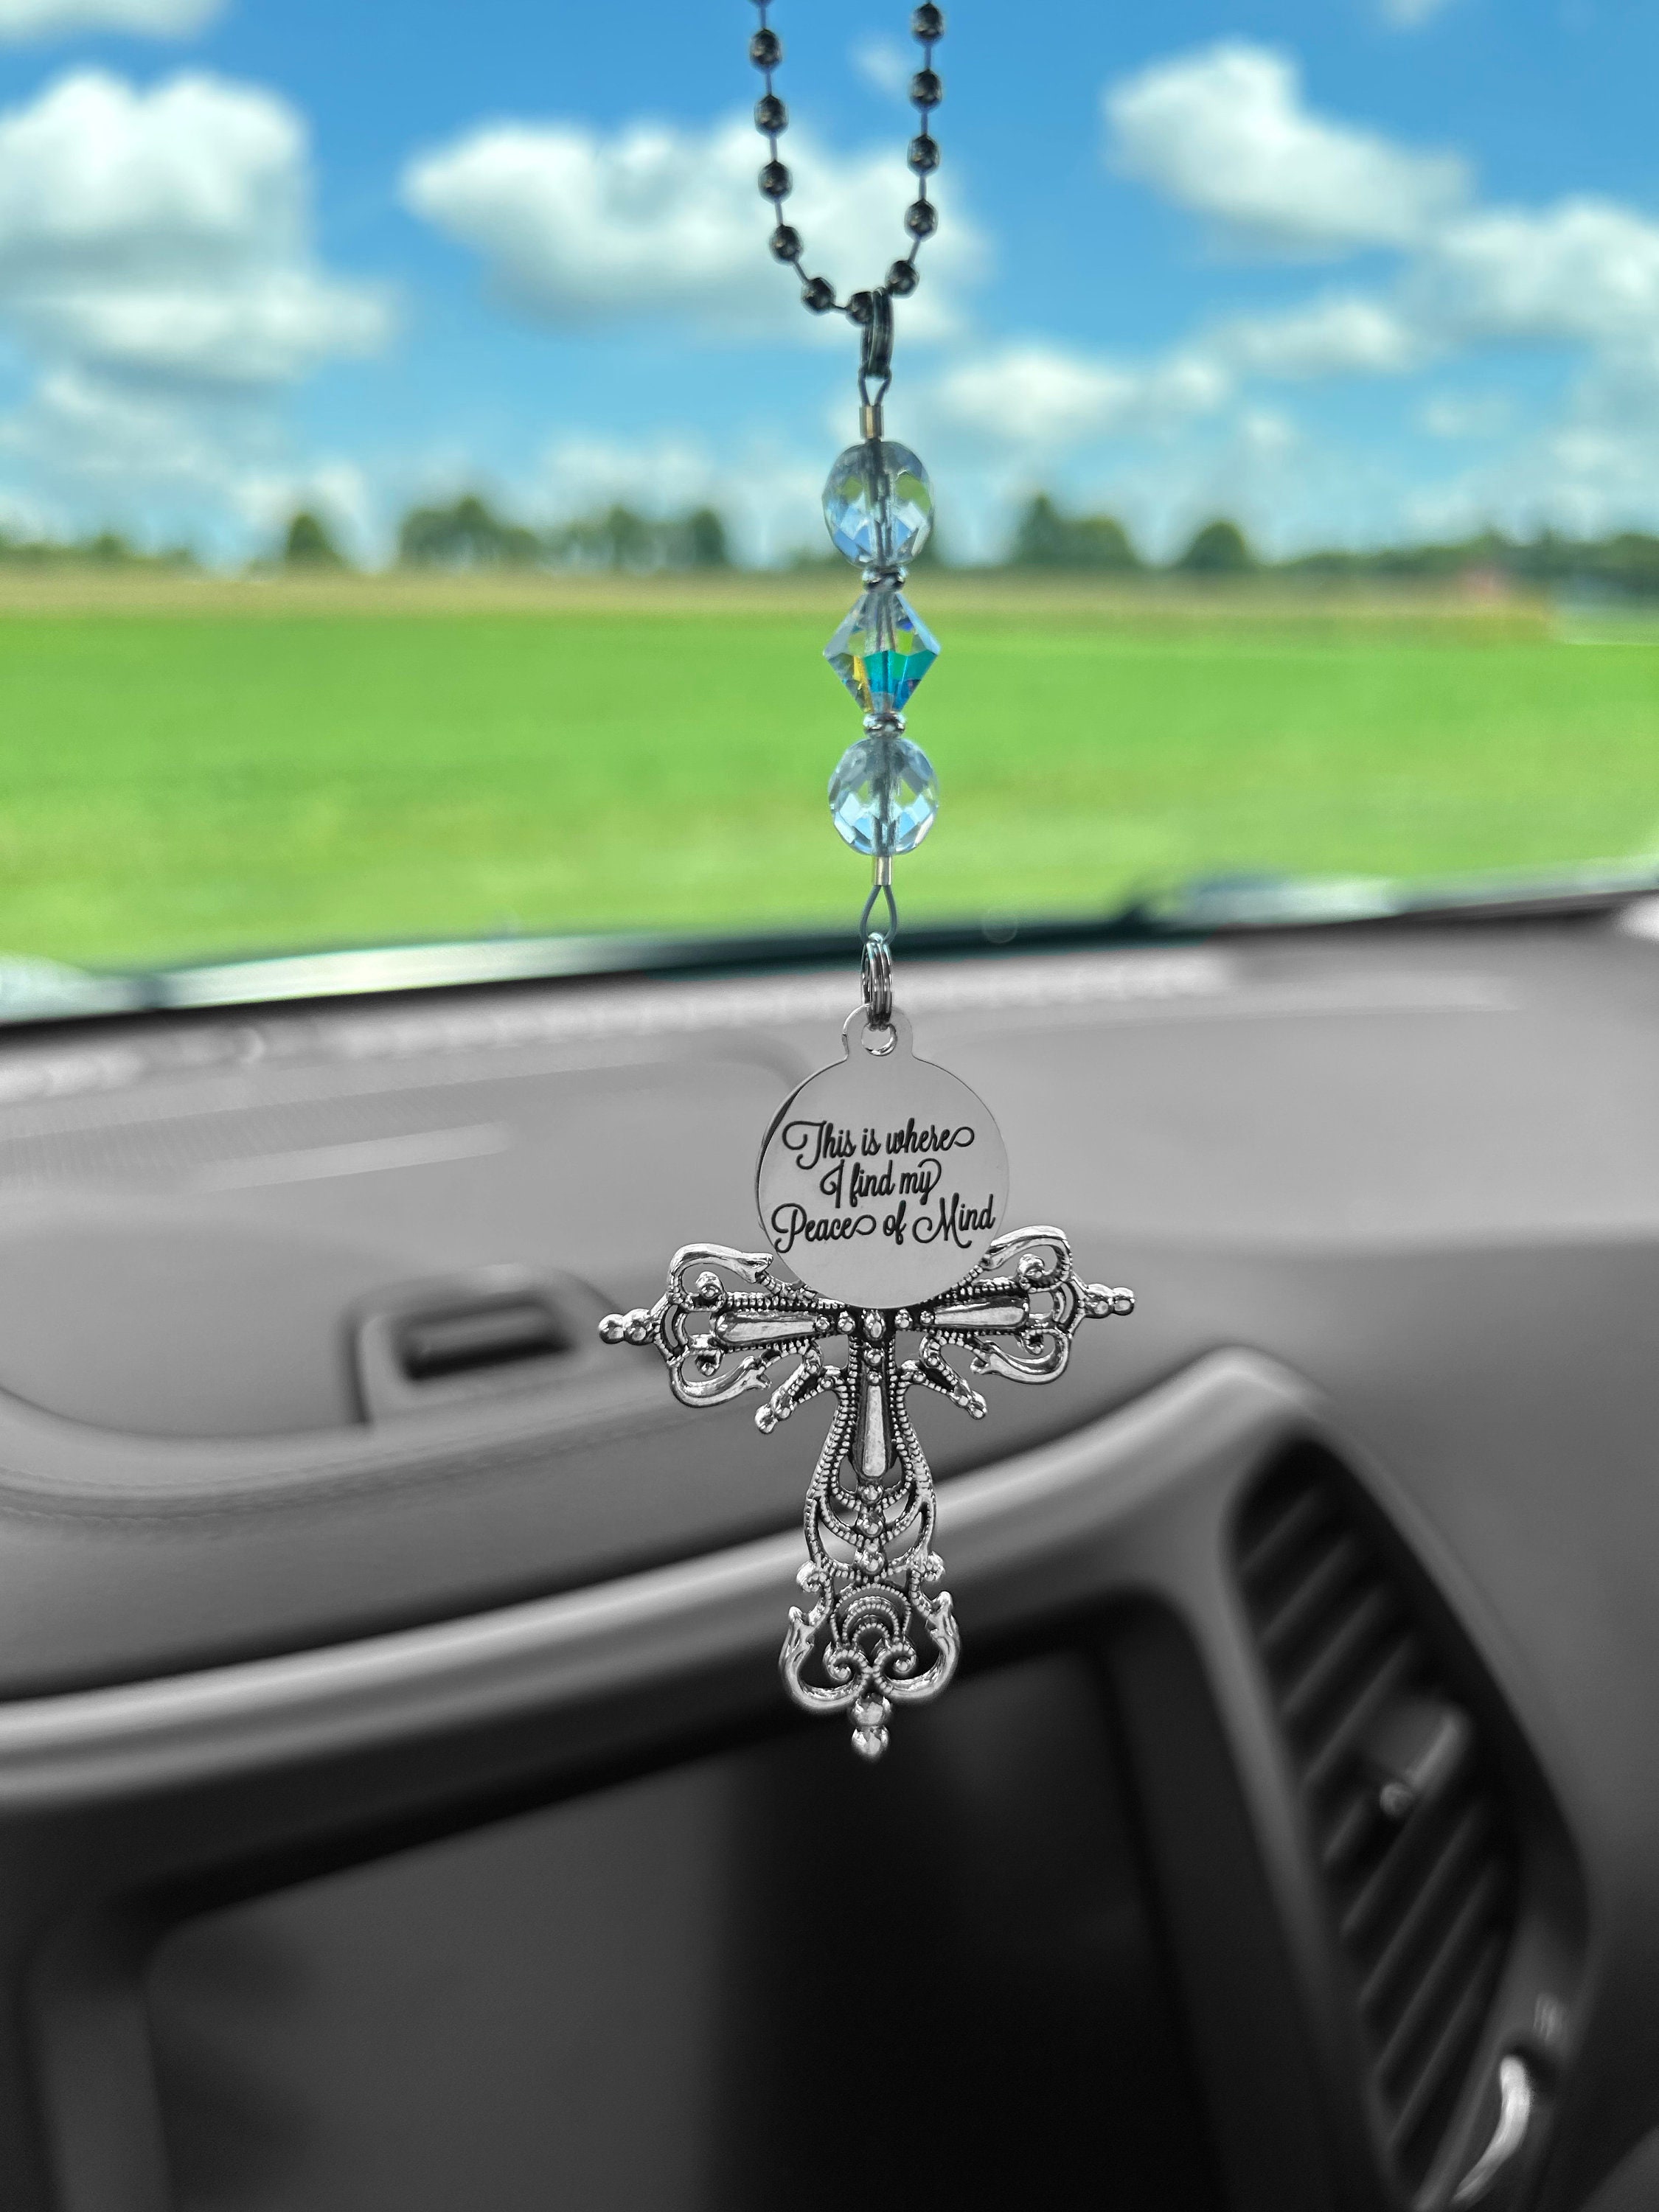 Religious, Spiritual Cross and This is Where I Find My Peace of Mind  charms & Birthstone Crystal Rear View Mirror Car Charm Soulful Gift